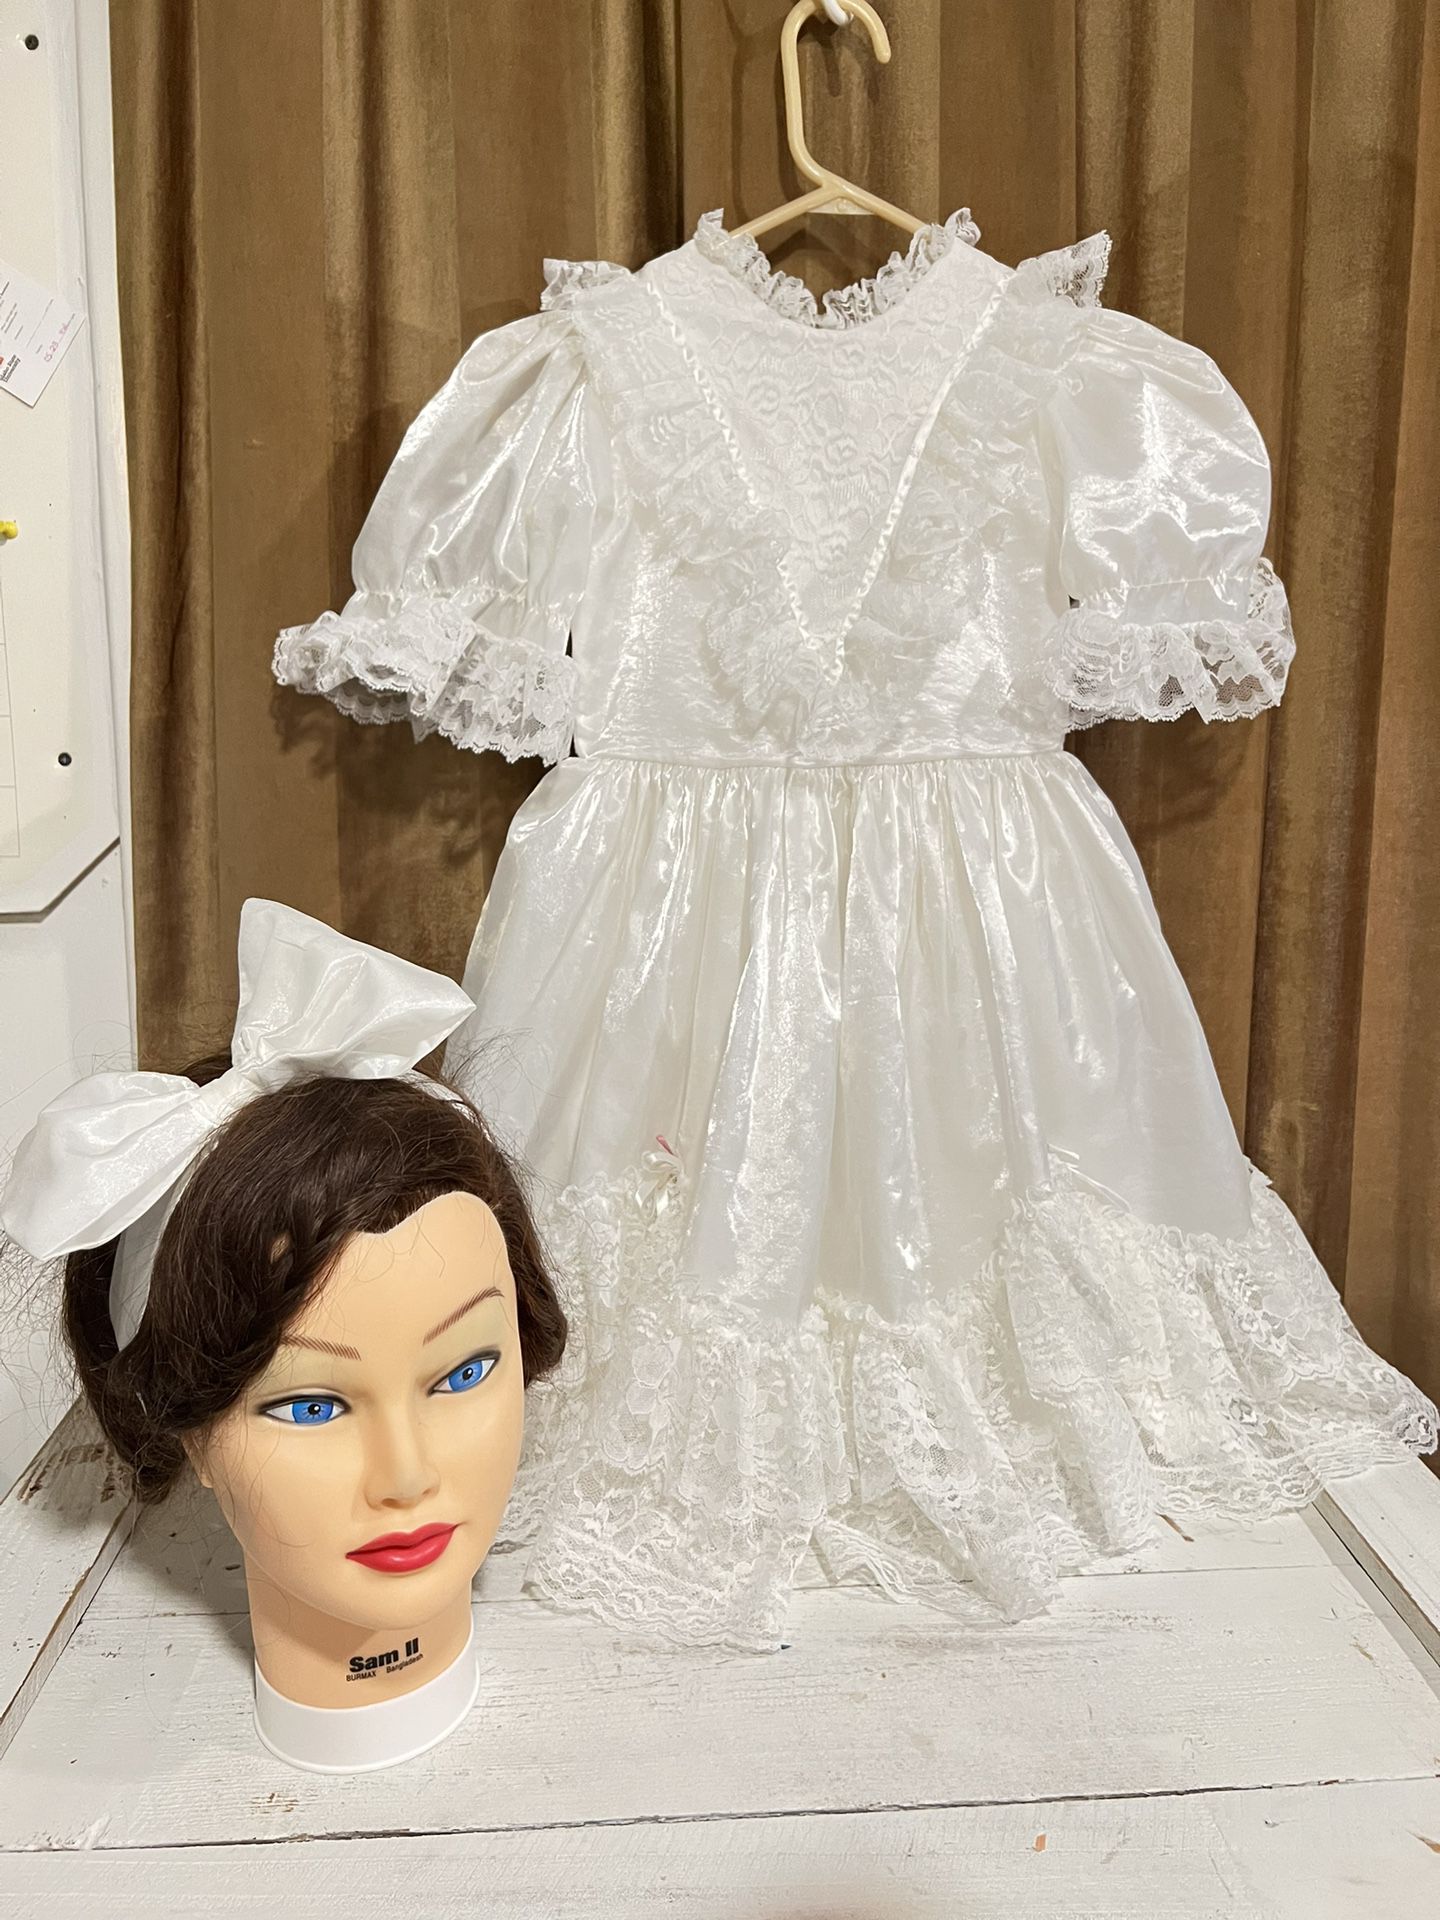 Dress Girls vintage white !  girls party dress size 7 Waist and shoulders 12” Large 27”